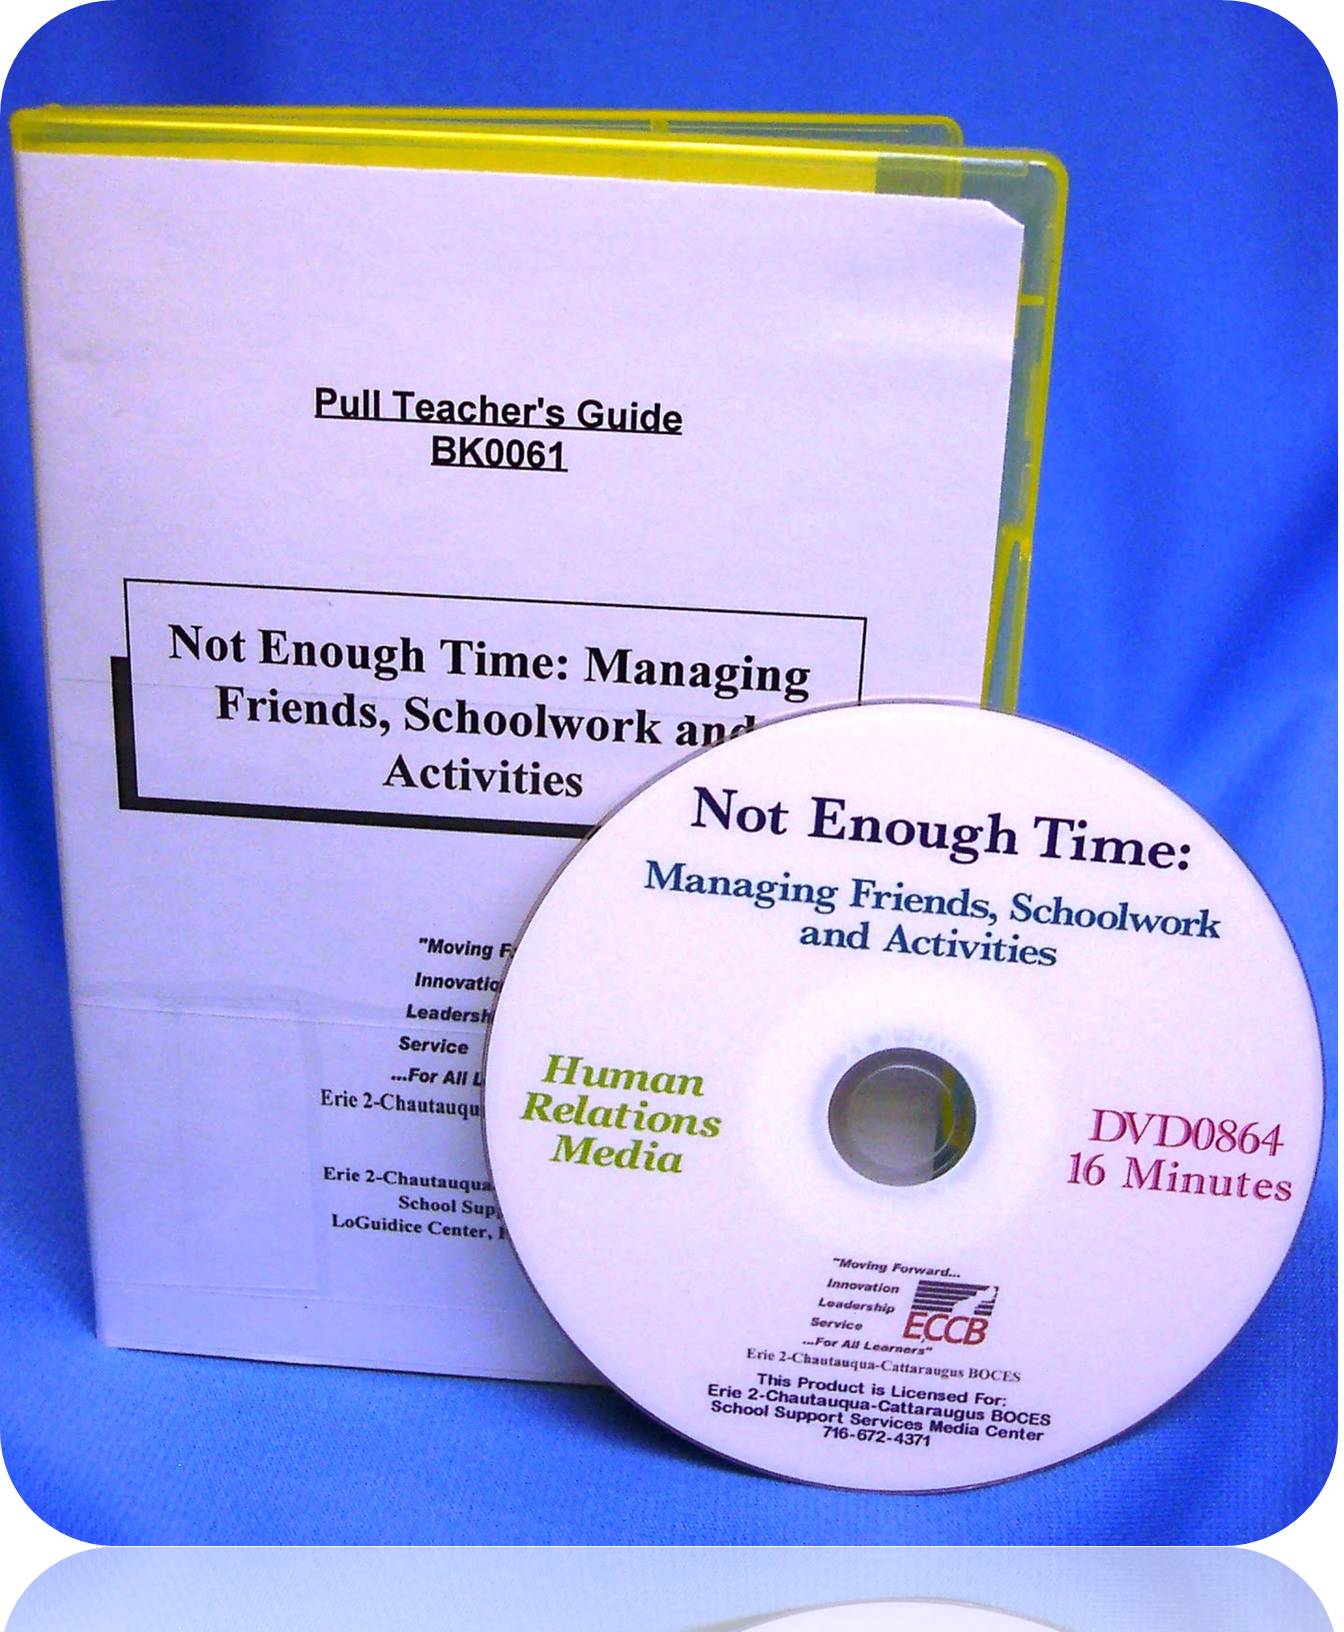 Not Enough Time: Managing Friends, Schoolwork and Activities